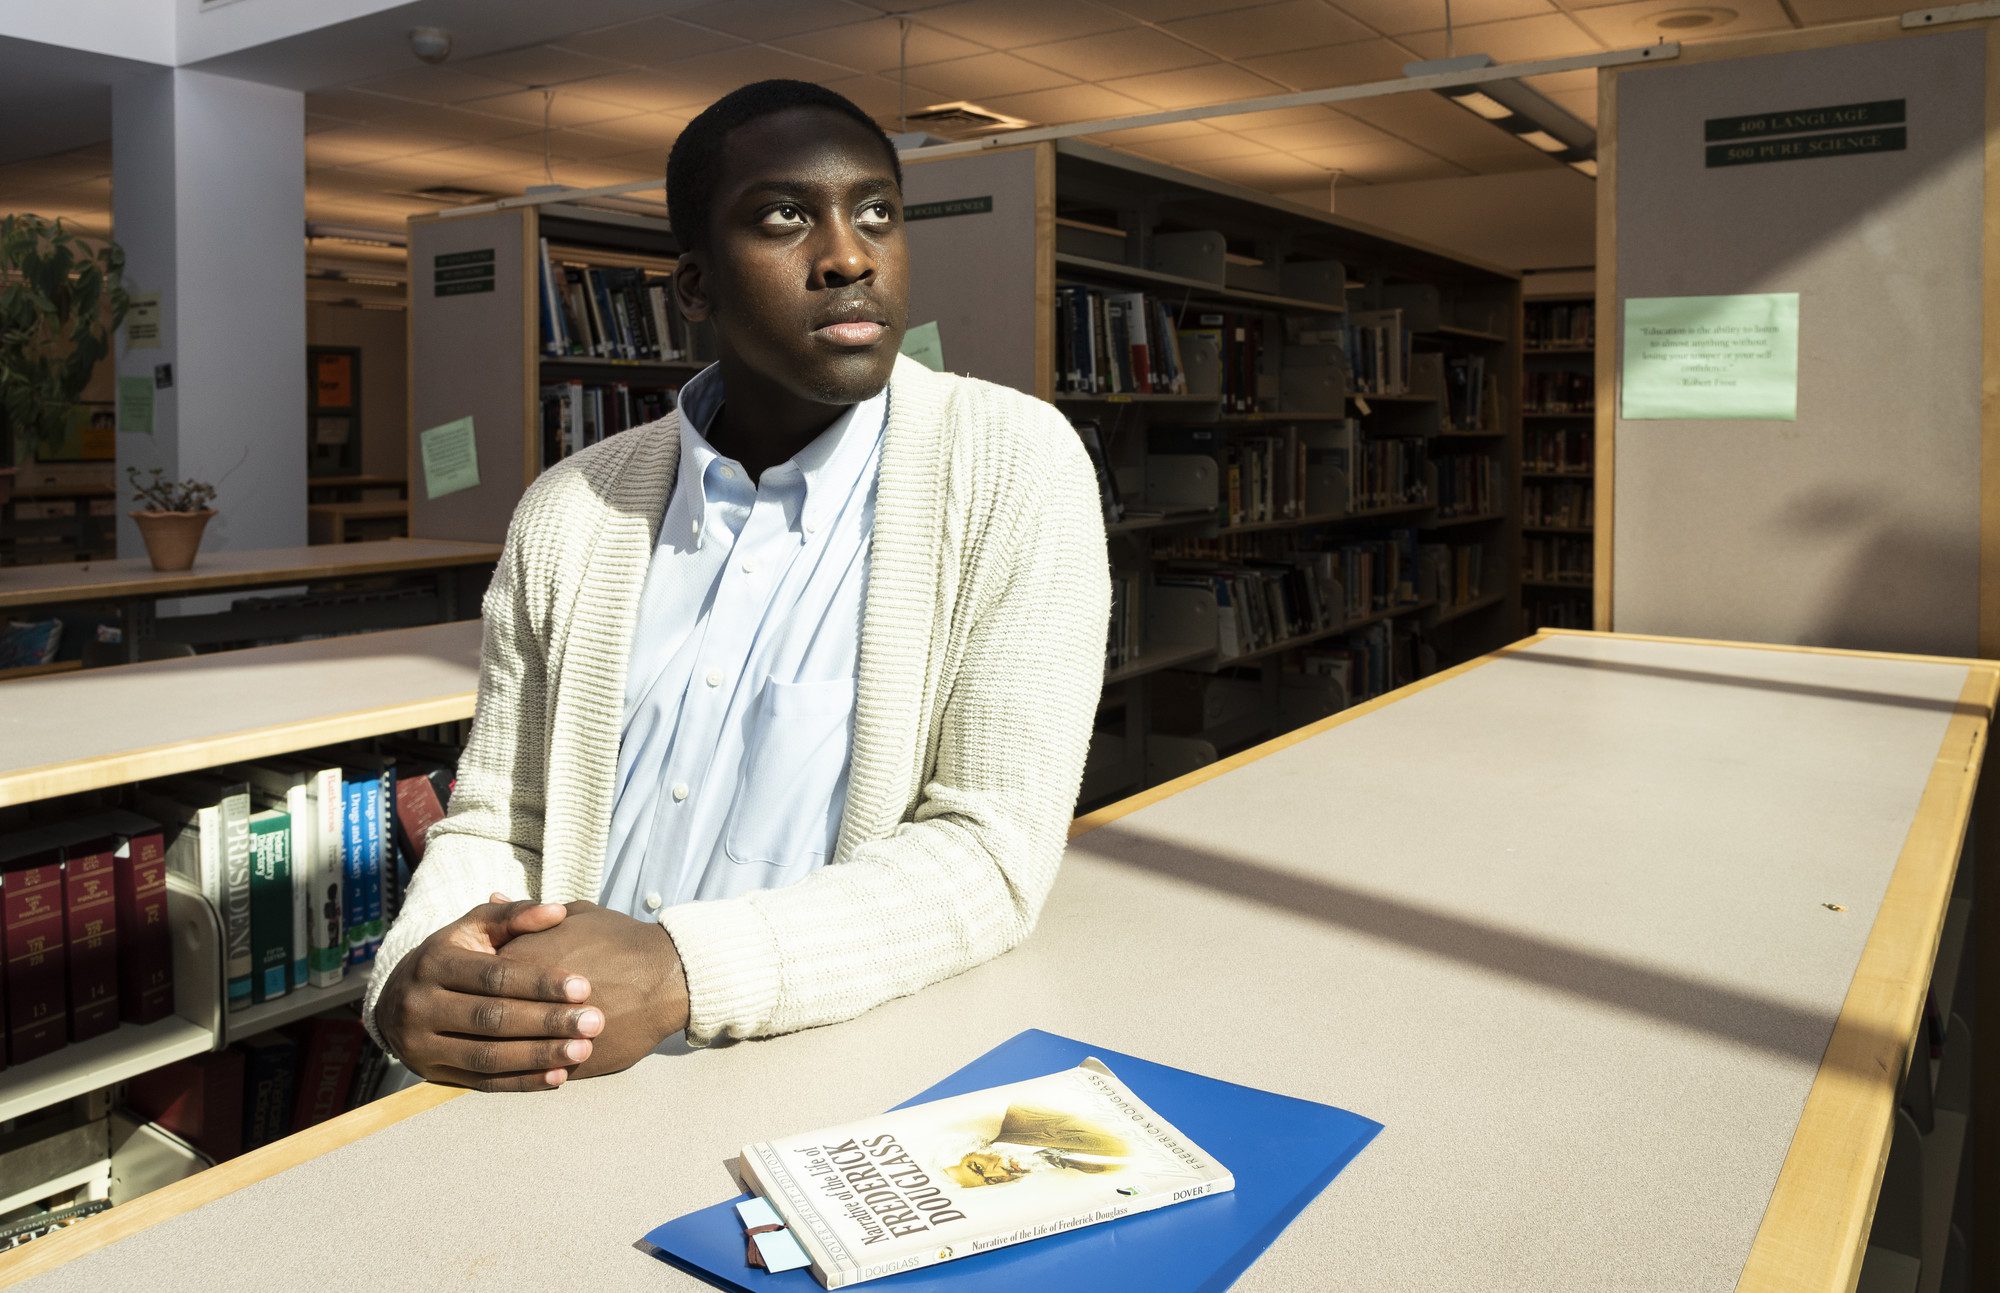 Lynn Classical High School junior Joseph Severe has been awarded the Fredrick Douglass Bicentennial Award at the Regional National History Day competition and plans to use part of his scholarship to create a Civil Rights section in the school's library.